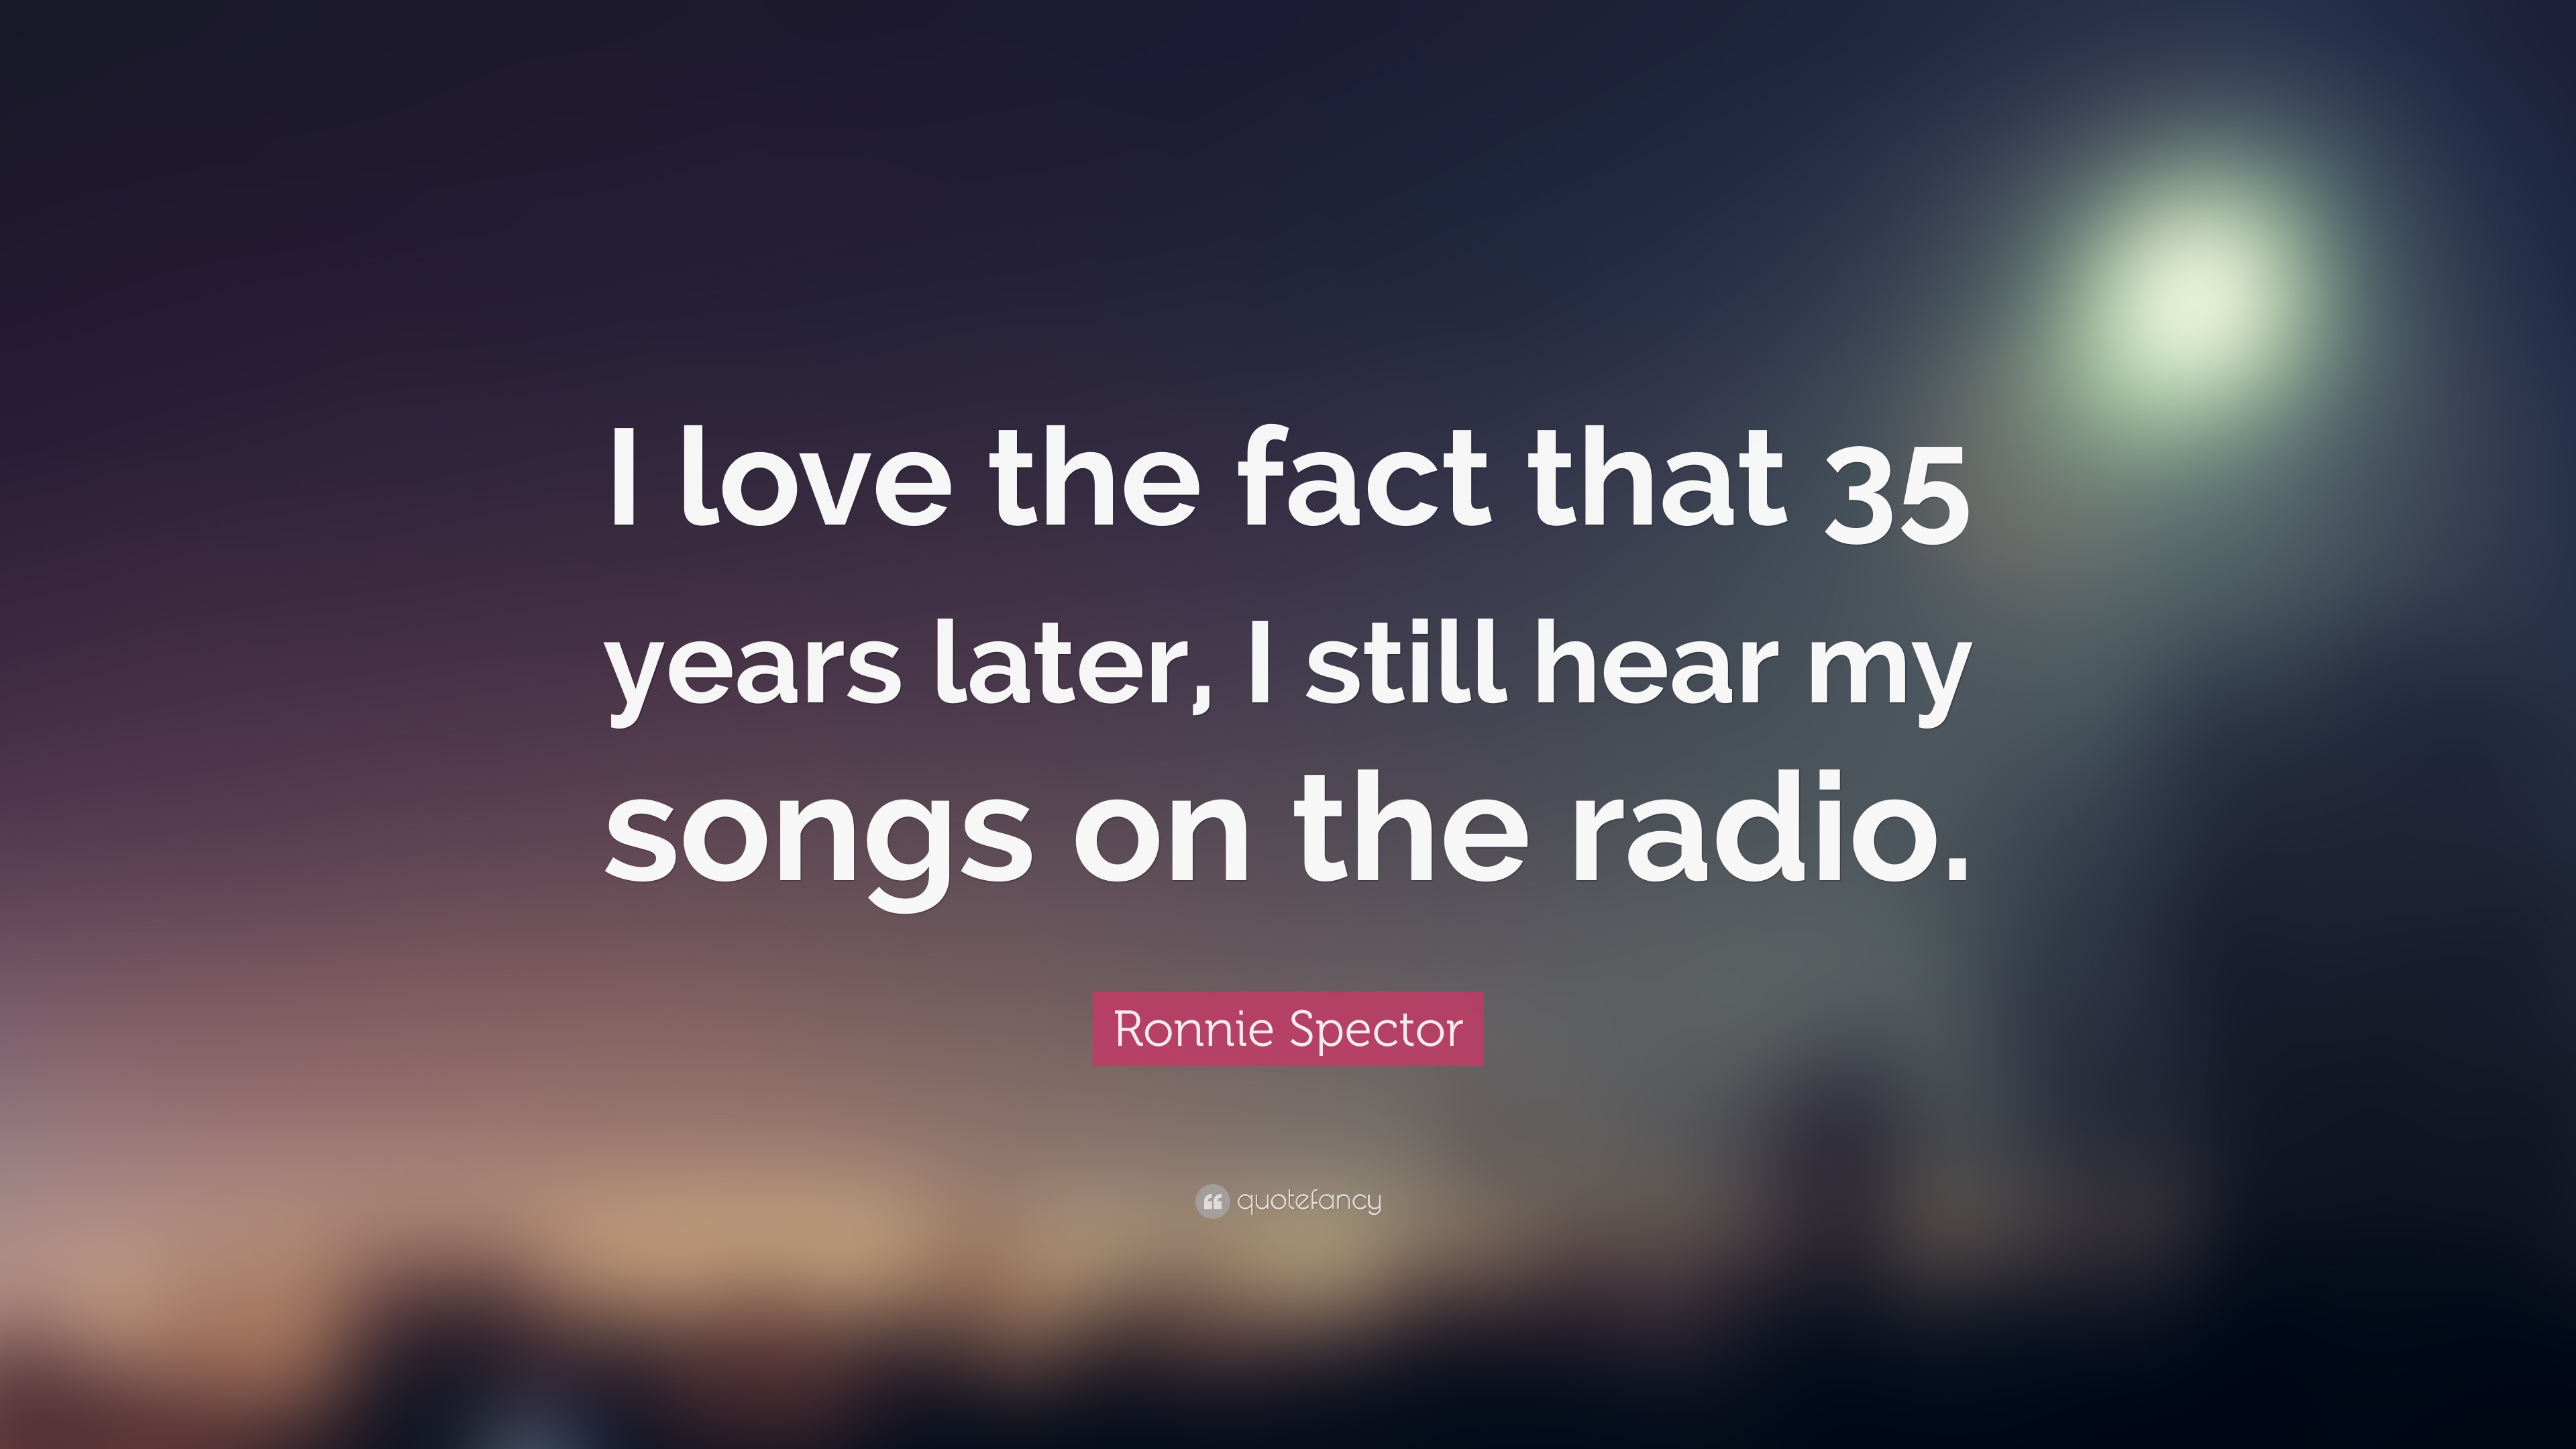 5 Ronnie Spector Quotes About Love